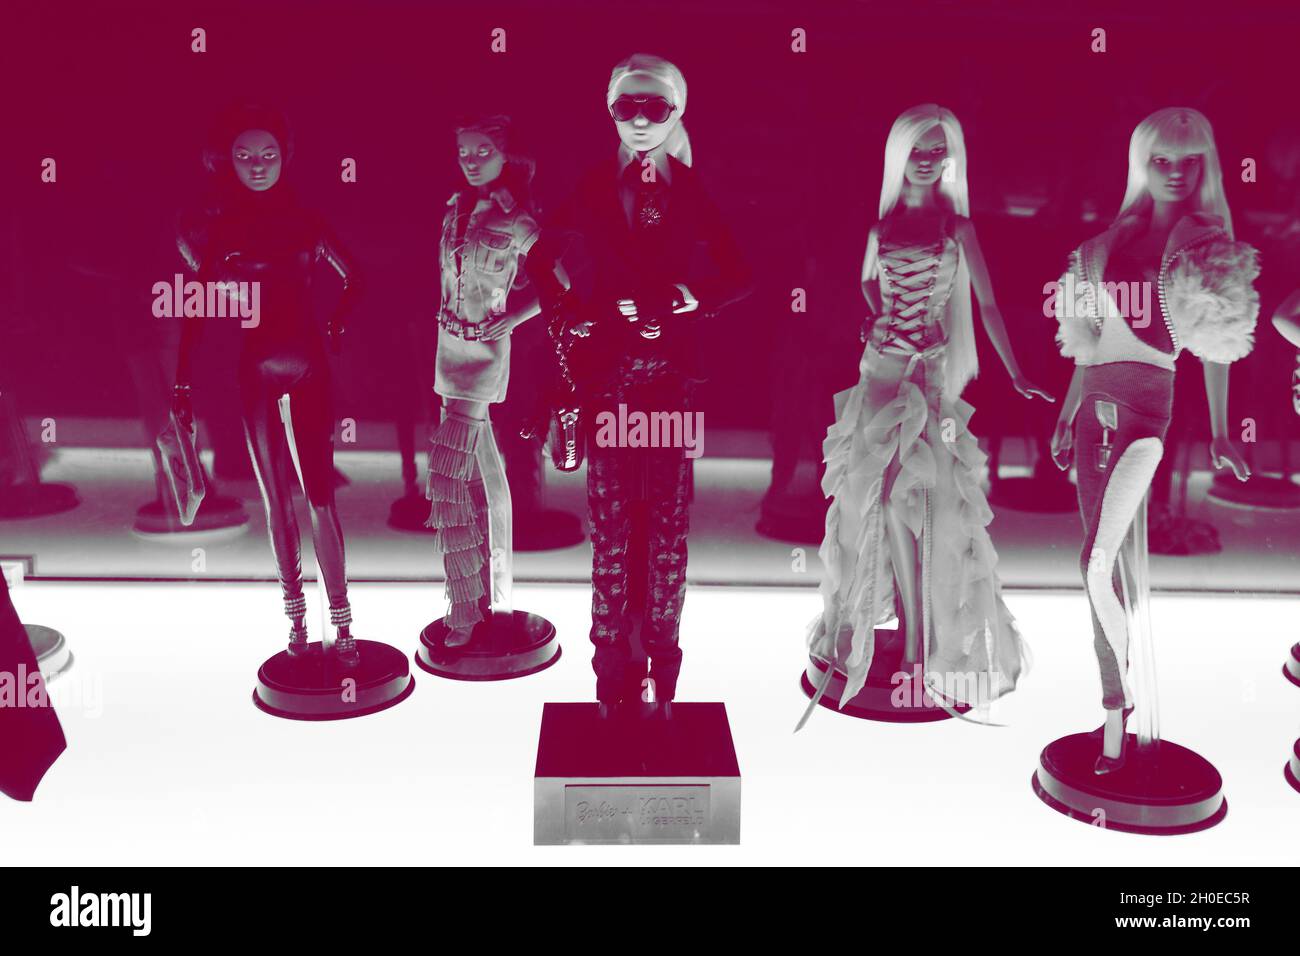 Karl Lagerfeld Barbie, Barbie The Icon exposition at Mudec museum in Milan, Italy Stock Photo